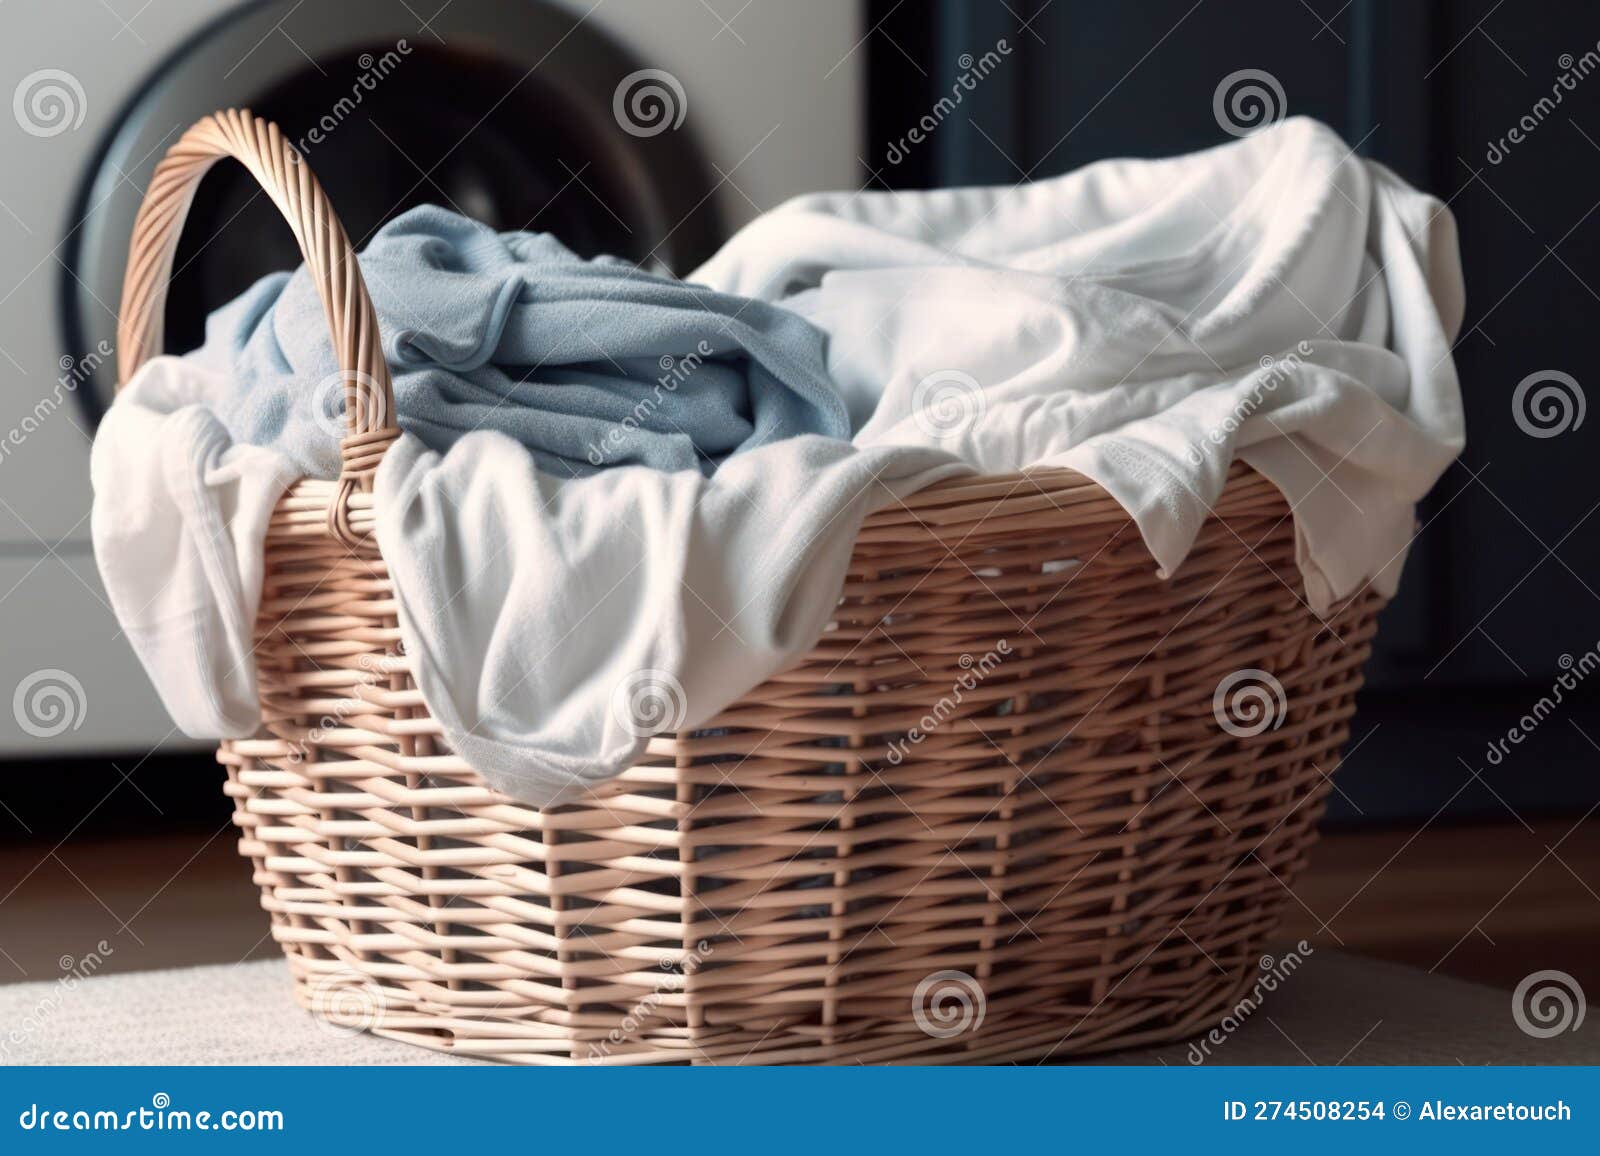 wicker basket with laundry close-up. washday